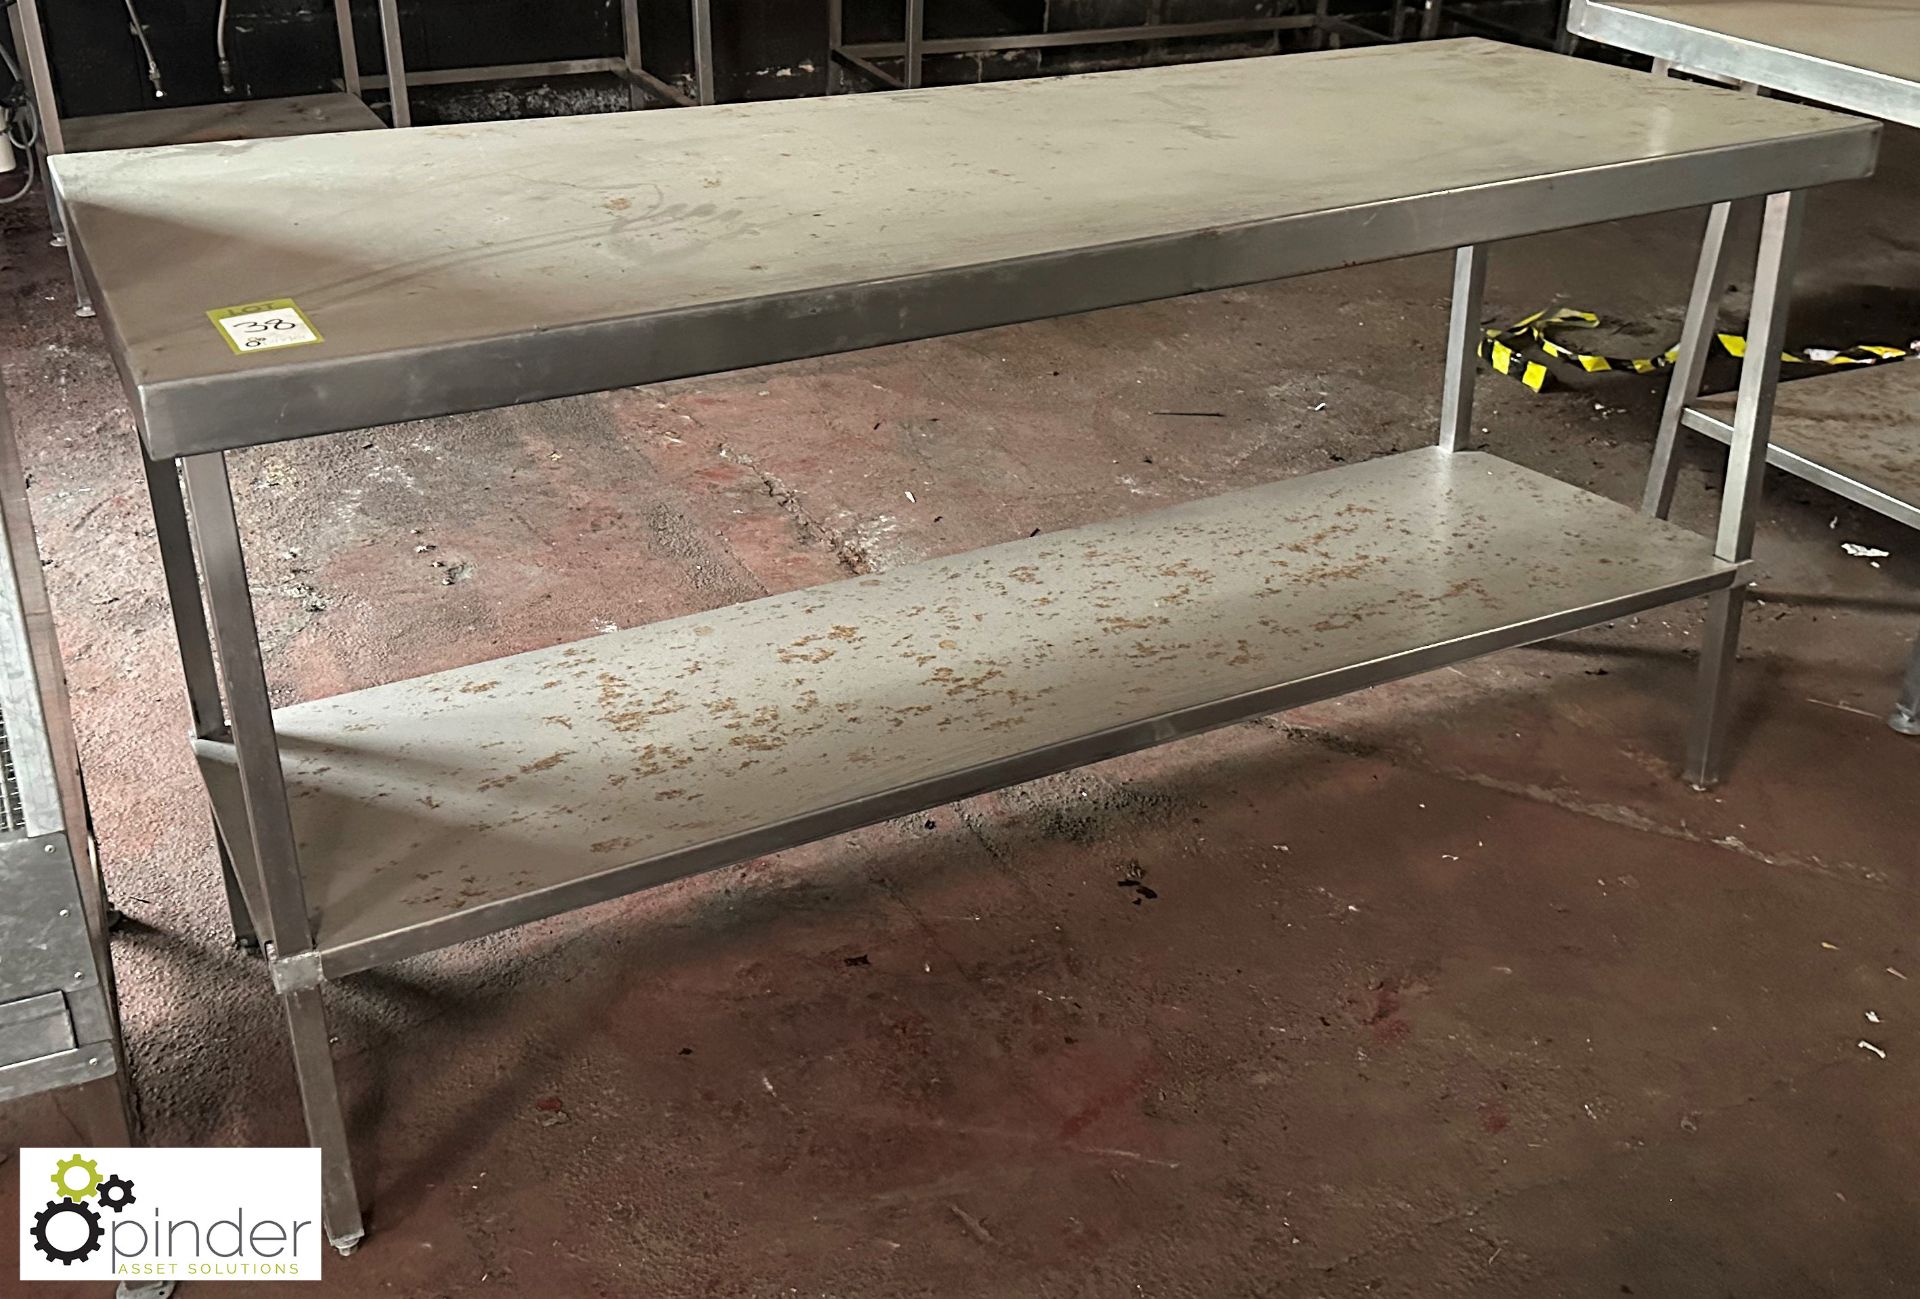 Stainless steel Preparation Table, 1800mm x 650mm x 880mm, with under shelf - Image 2 of 3